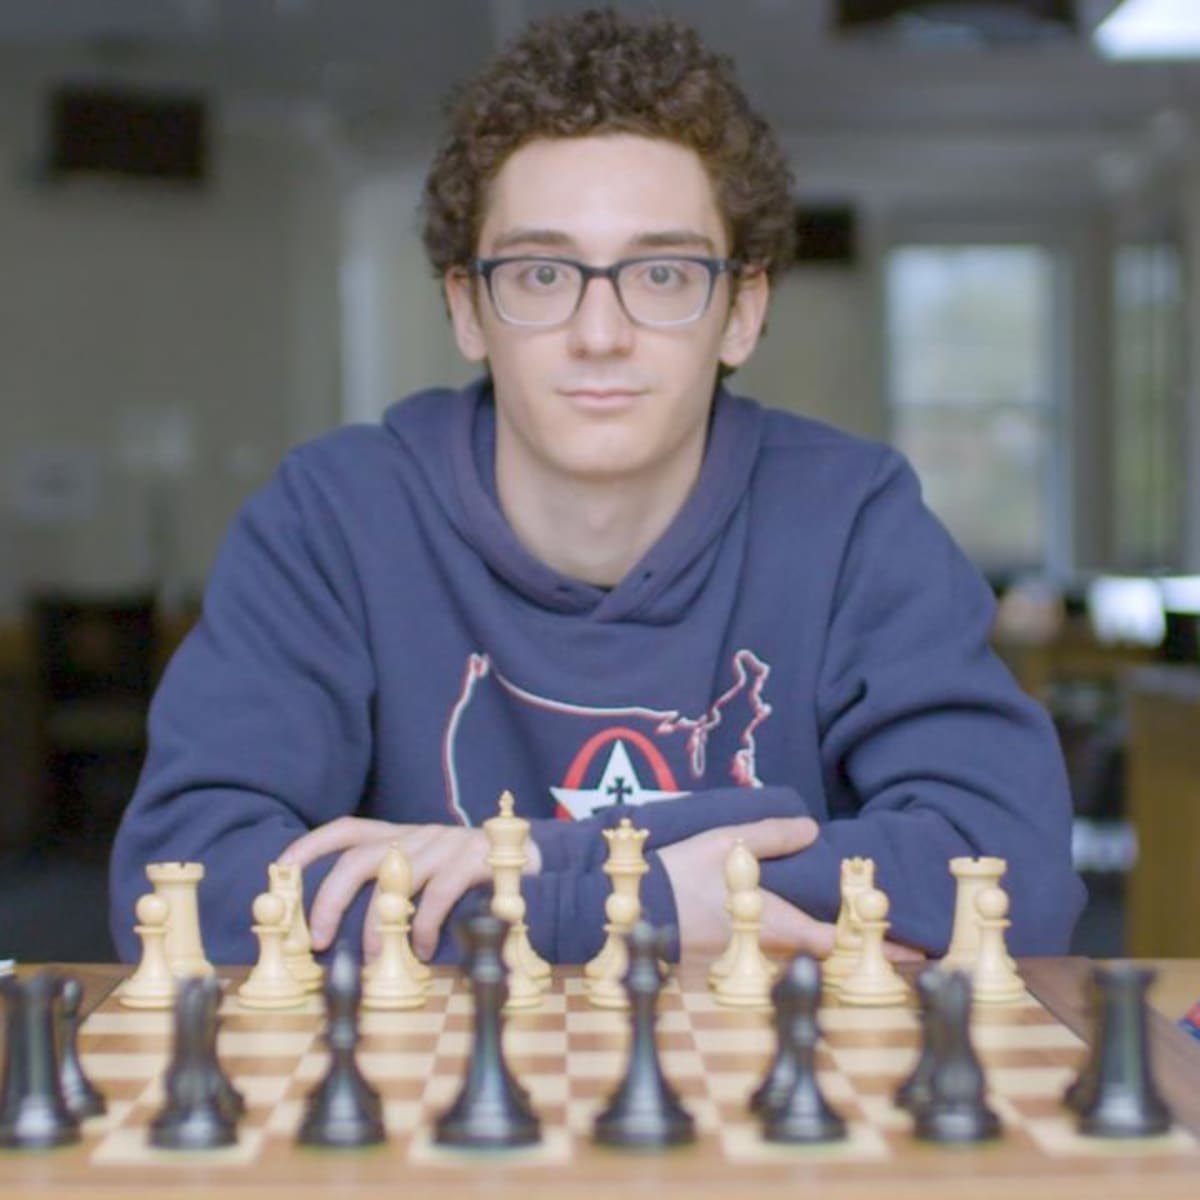 International Chess Federation on X: 3 days until the #FIDECandidates!  Meet the player: Fabiano Caruana The Italian-American Grandmaster  @FabianoCaruana is a regular on the top chess circuit and one of the most